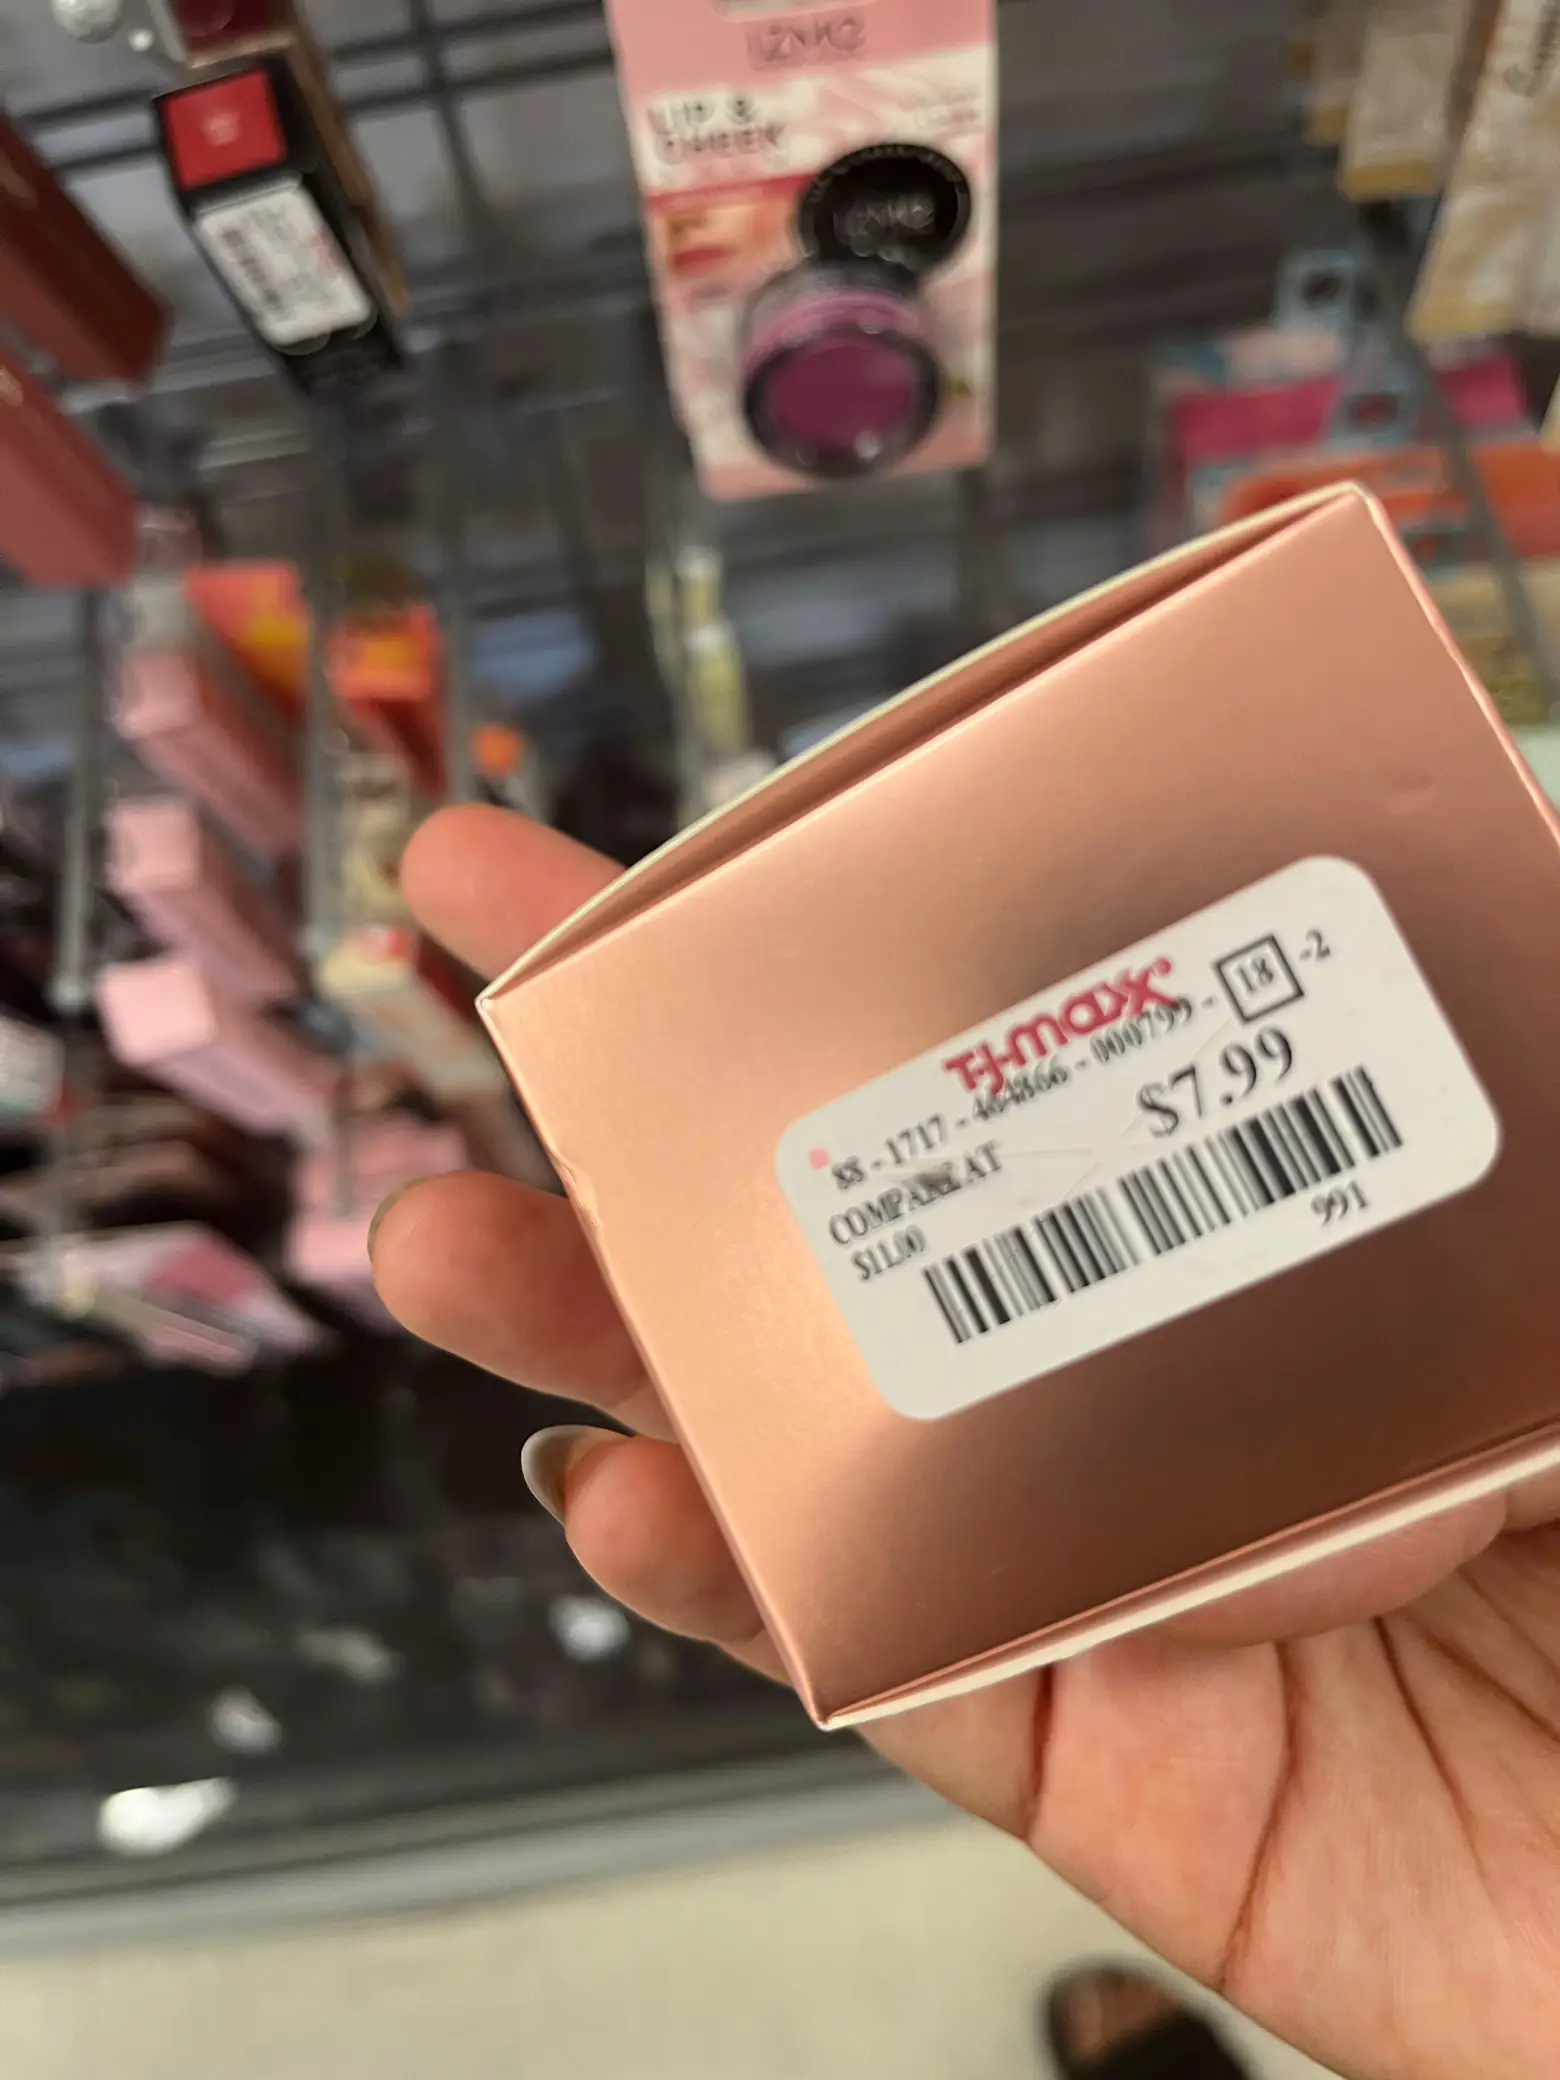 TJ Maxx Find, Gallery posted by MoeLanecreative